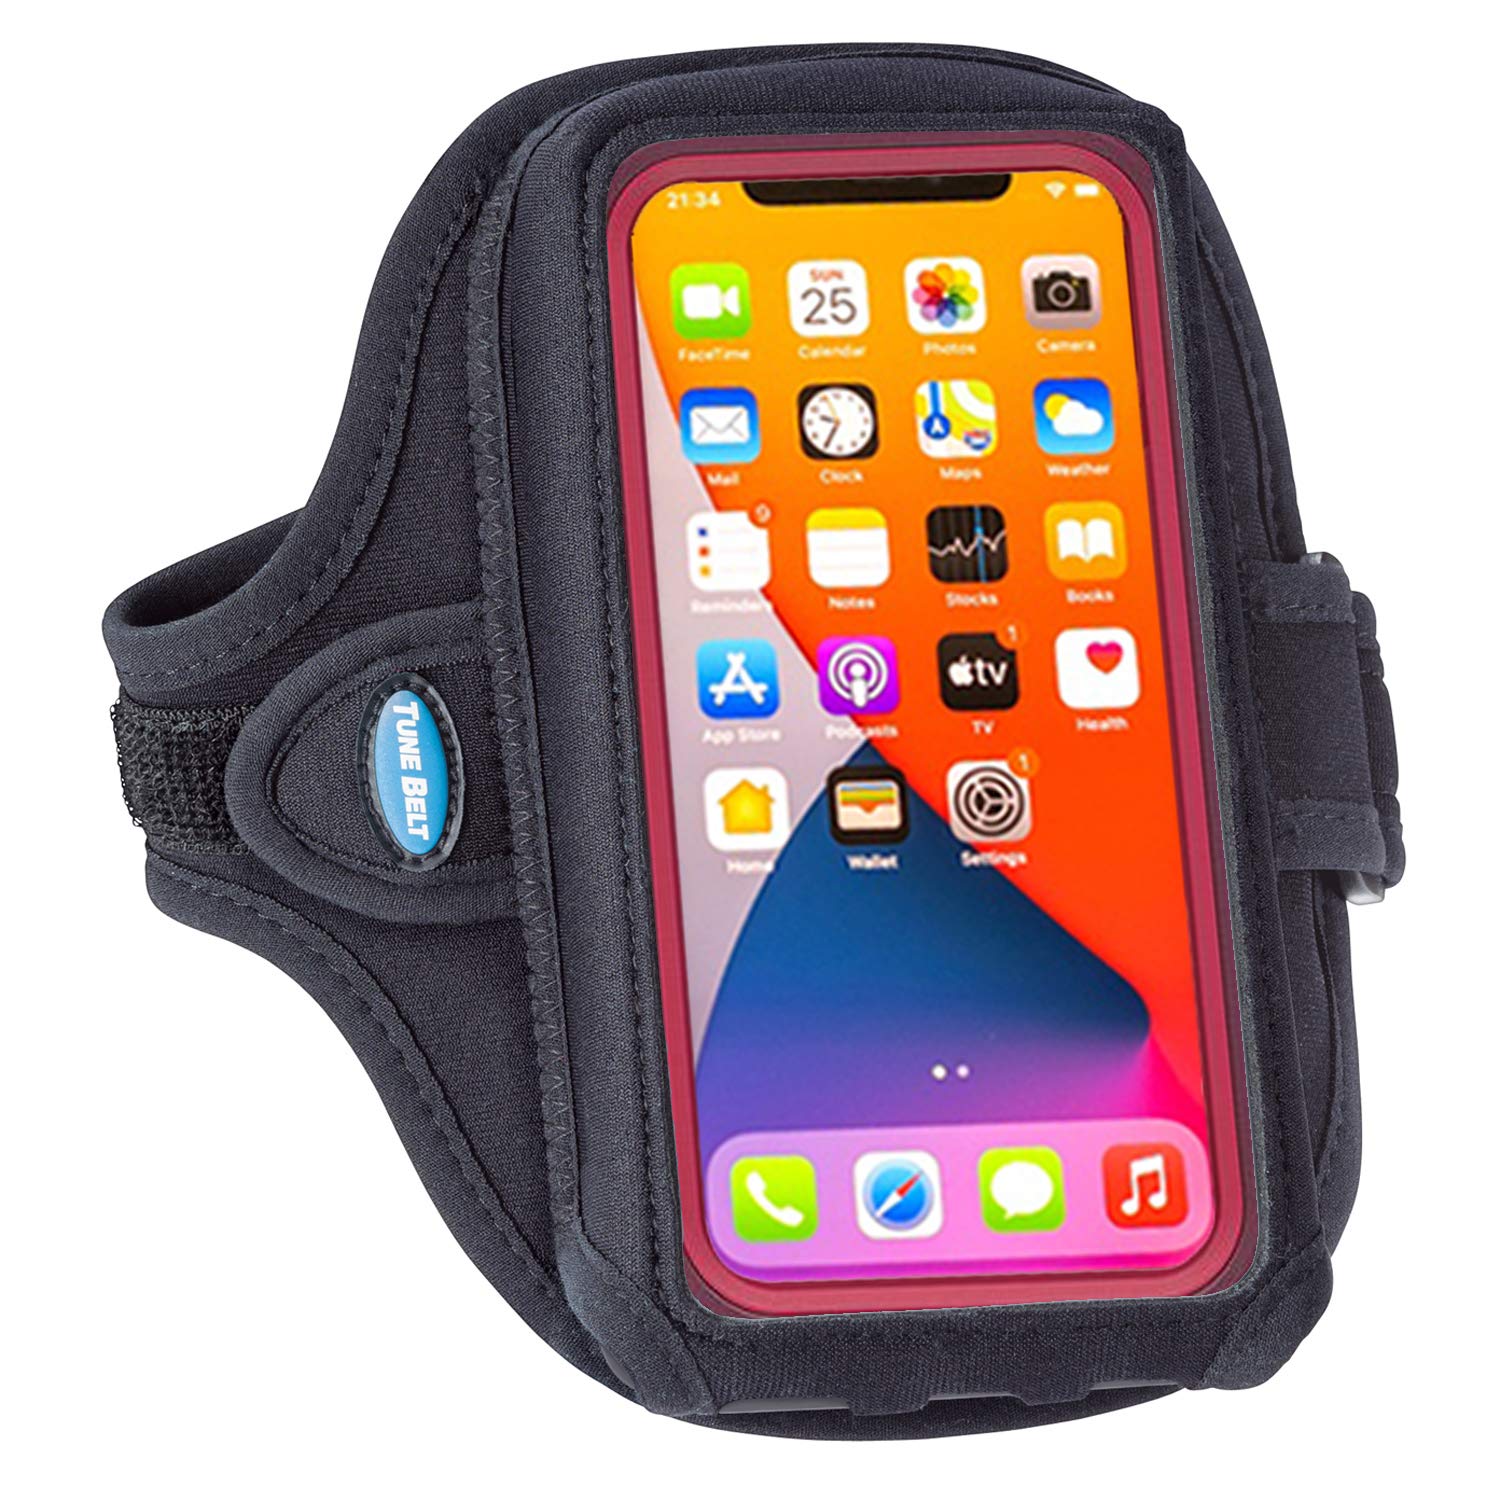 Tune Belt AB92 Cell Phone Running Armband Holder Case for iPhone 14 Pro Max, 14 Plus, 11/12/13 Pro Max, 11/XR/XS Max and Galaxy Note/Plus/Ultra (Extra Depth fits Large Case) - Black